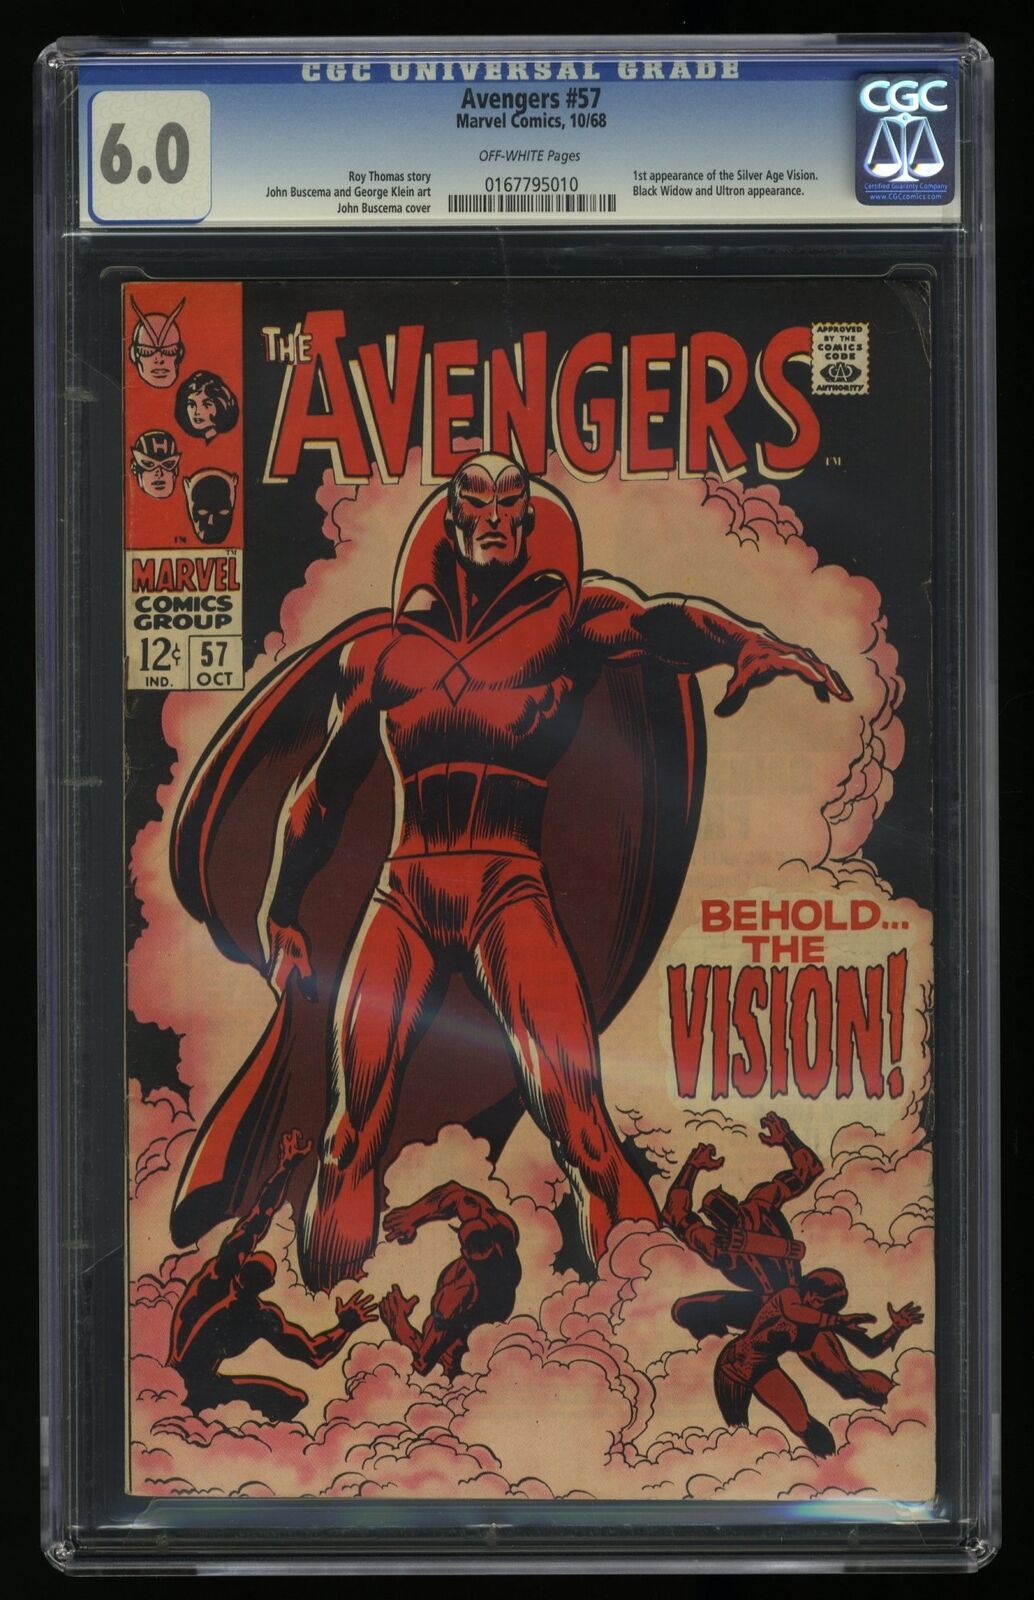 Avengers #57 CGC FN 6.0 Off White 1st Appearance Vision Buscema Cover